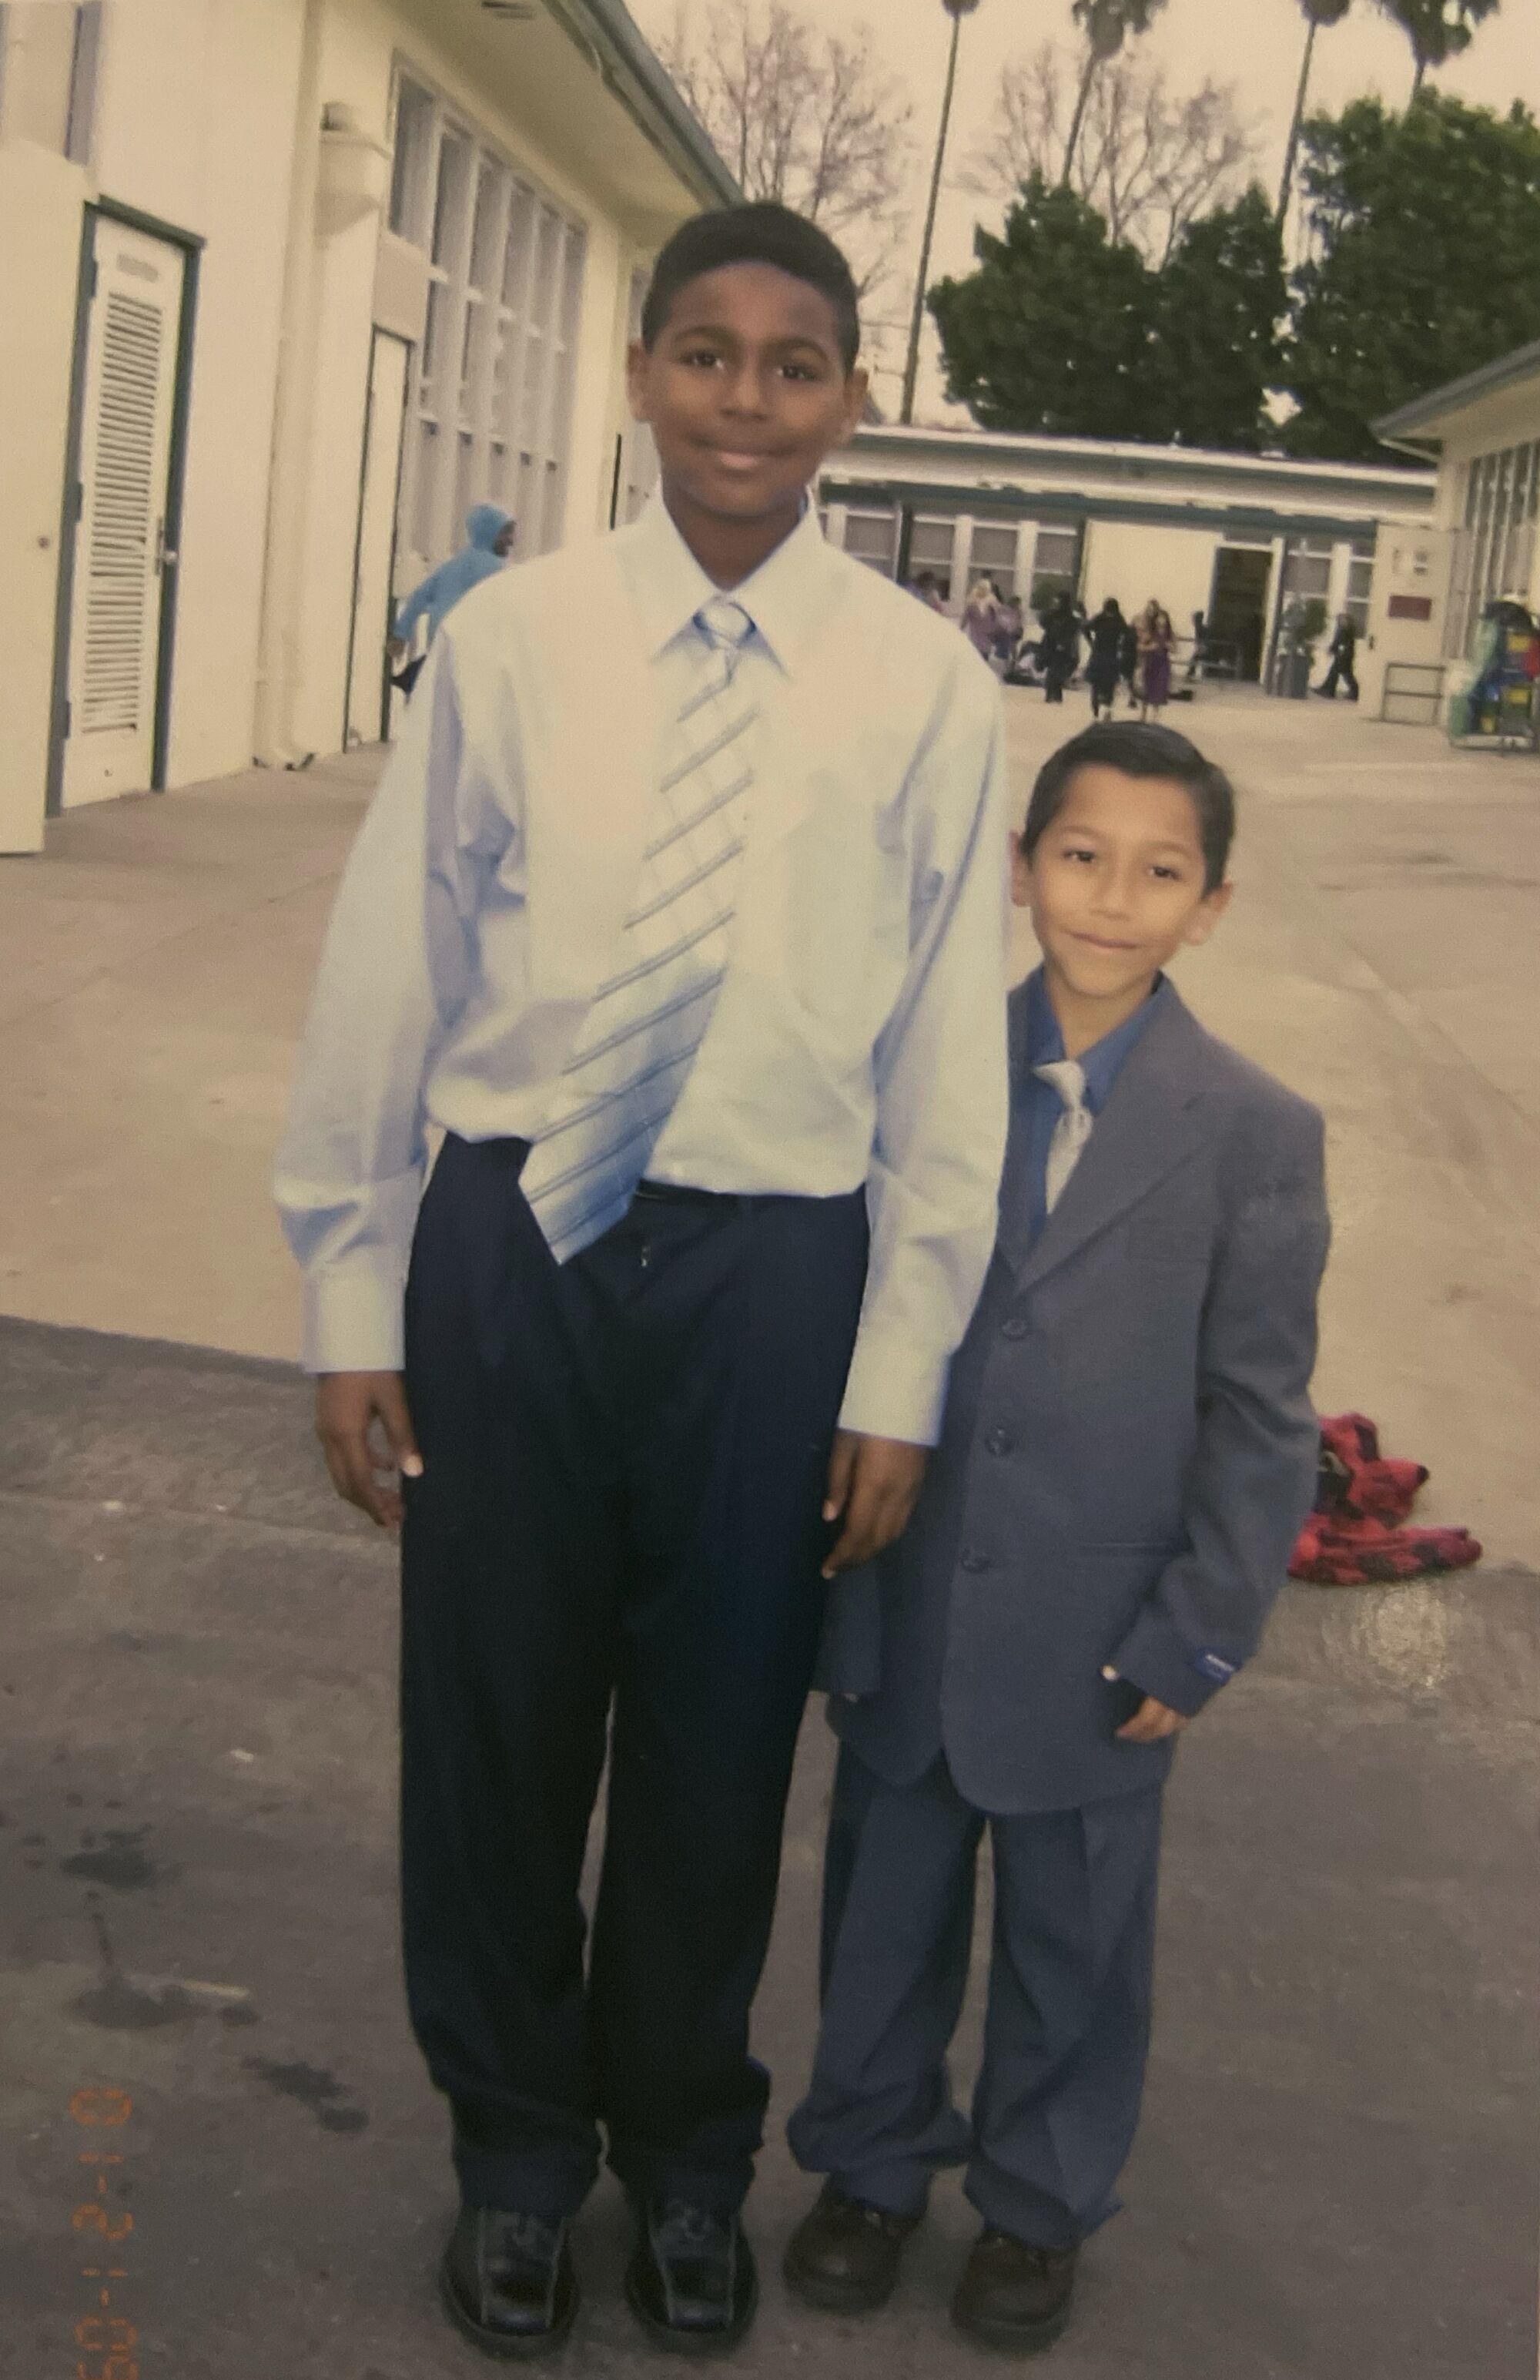 Myles Johnson, left, with his friend and fourth grade classmate Dorian Rodriguez.